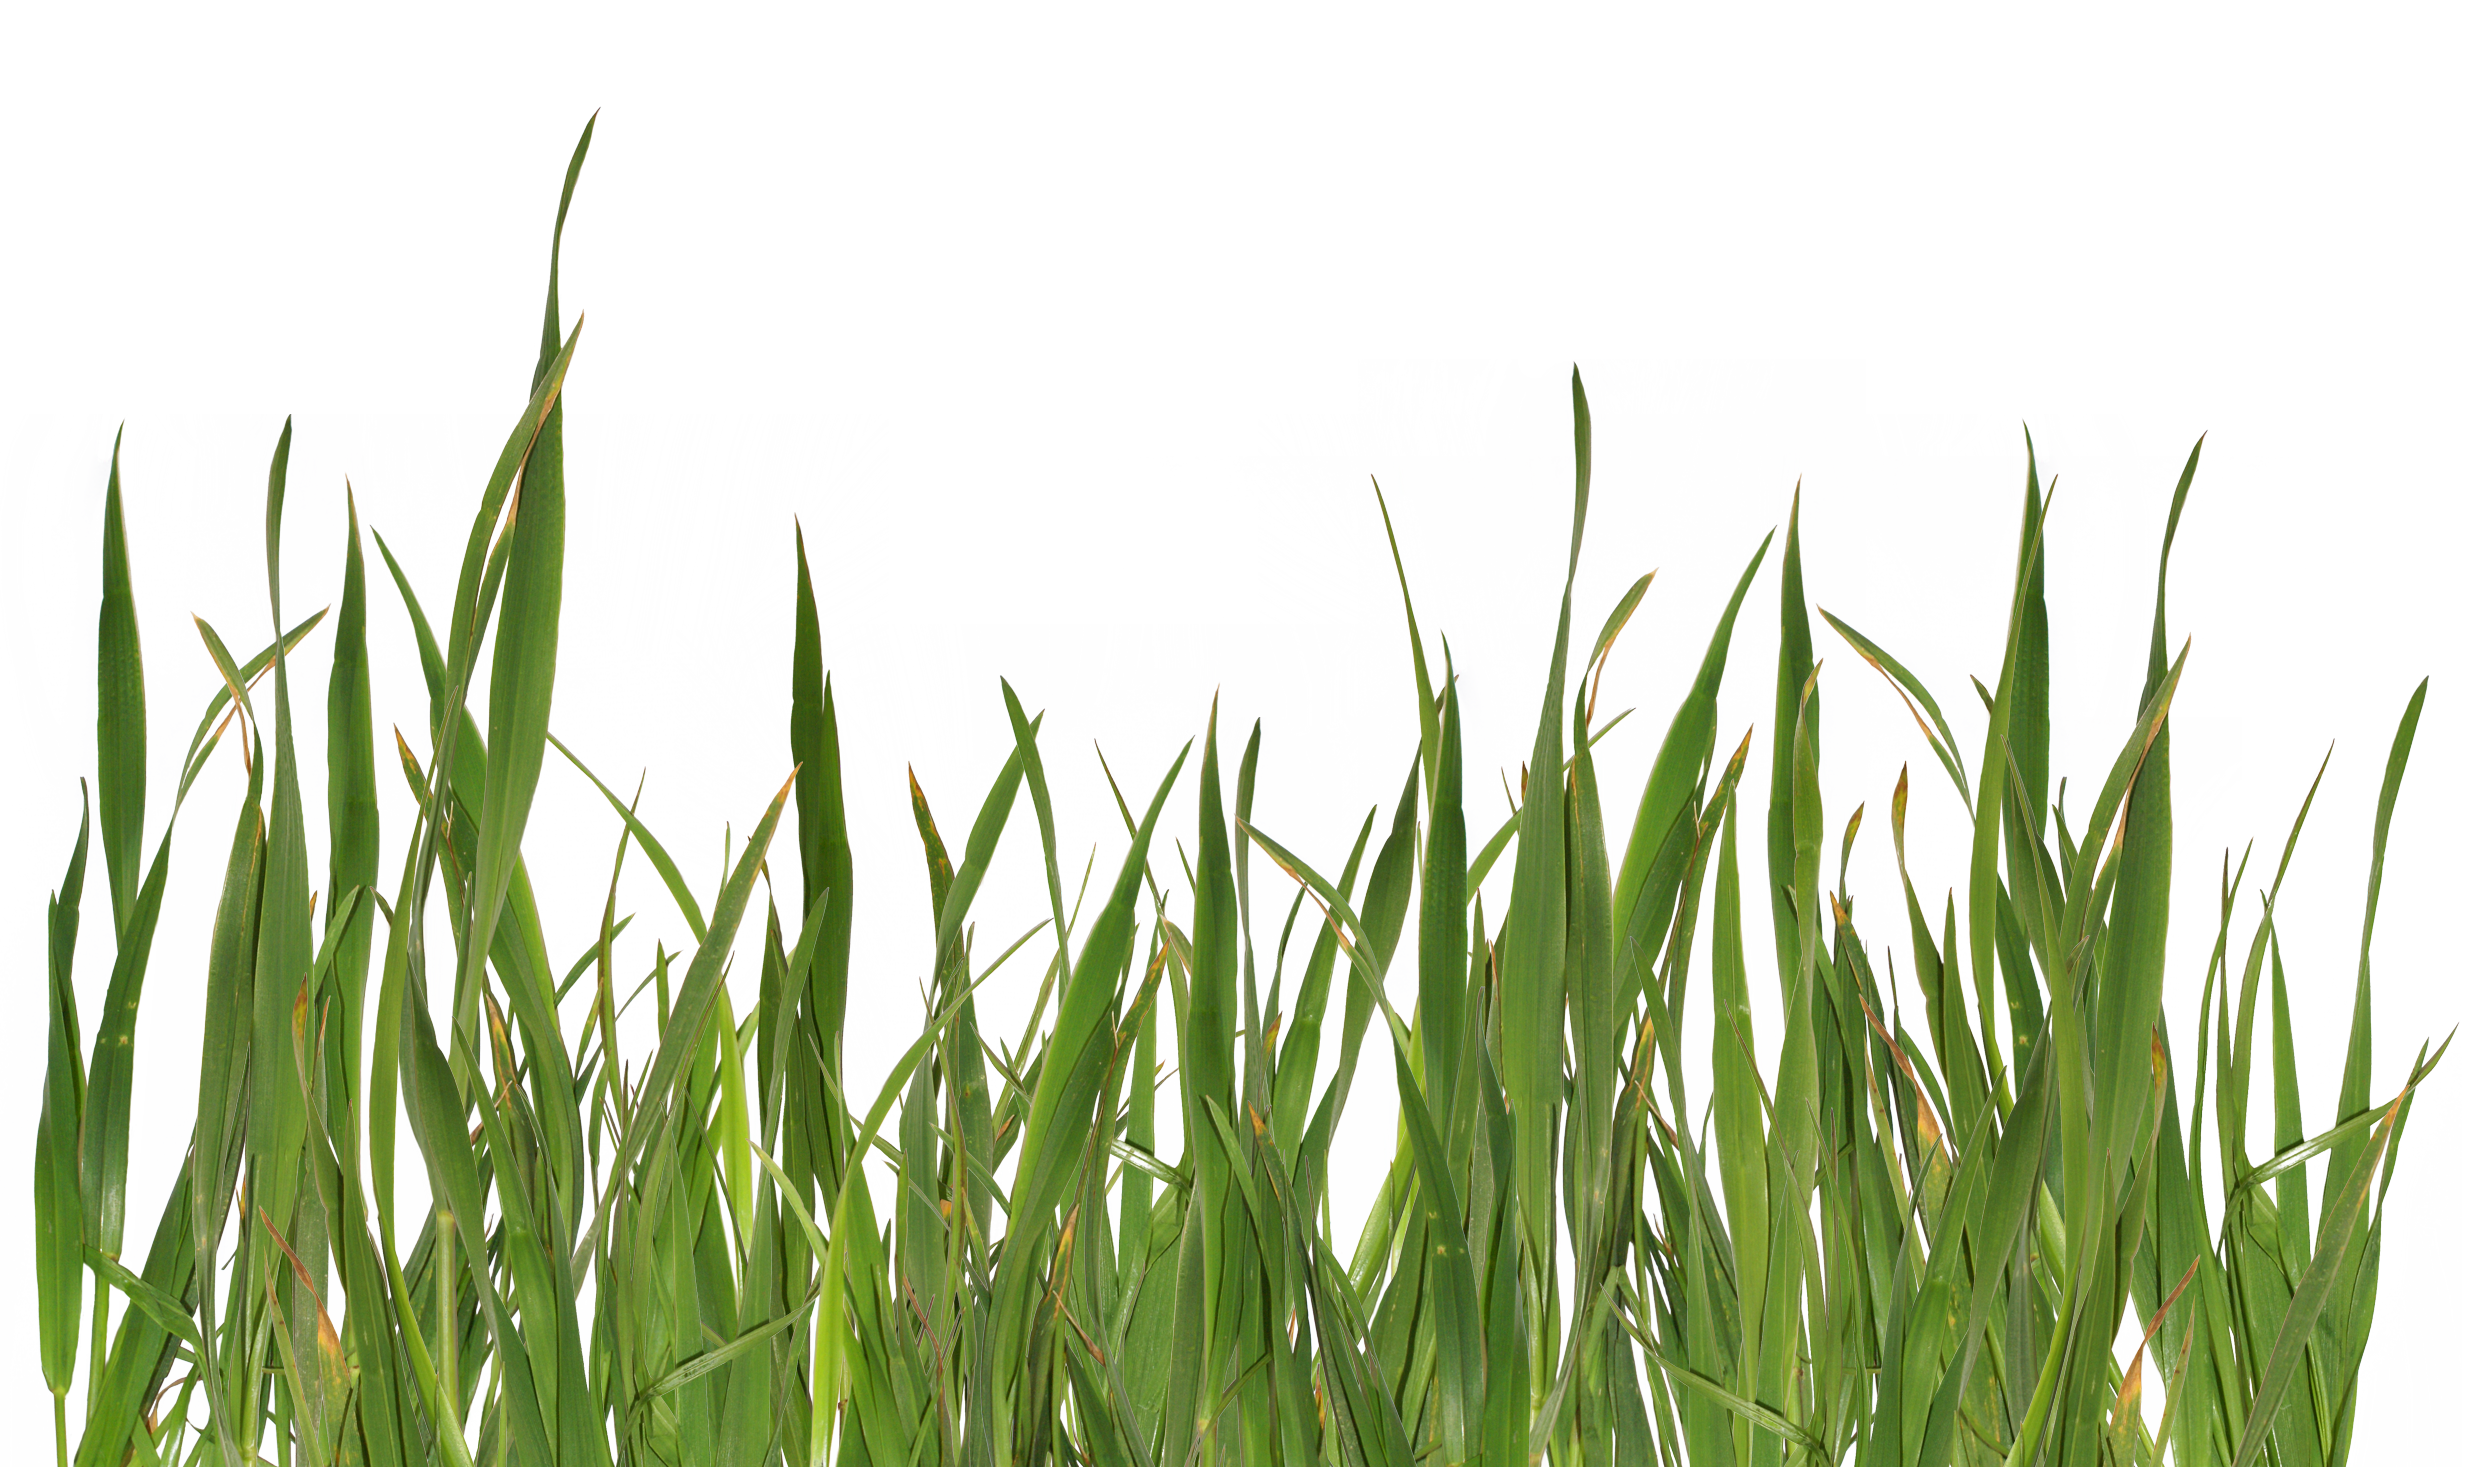 grass png image, green picture transparent image download, size: 600x600px